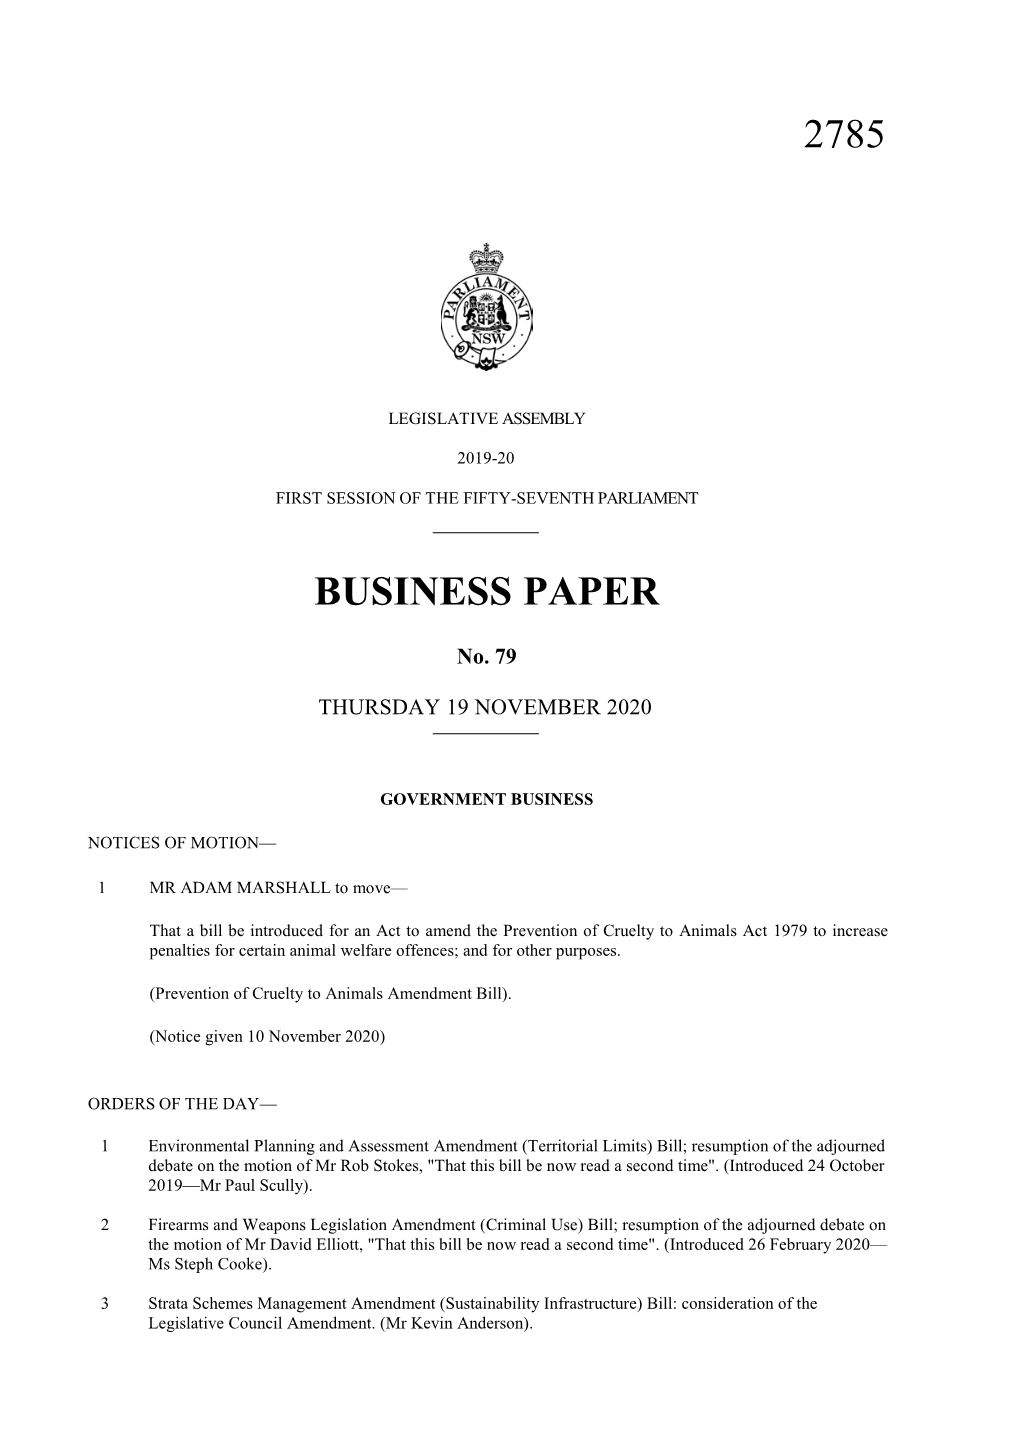 2785 Business Paper